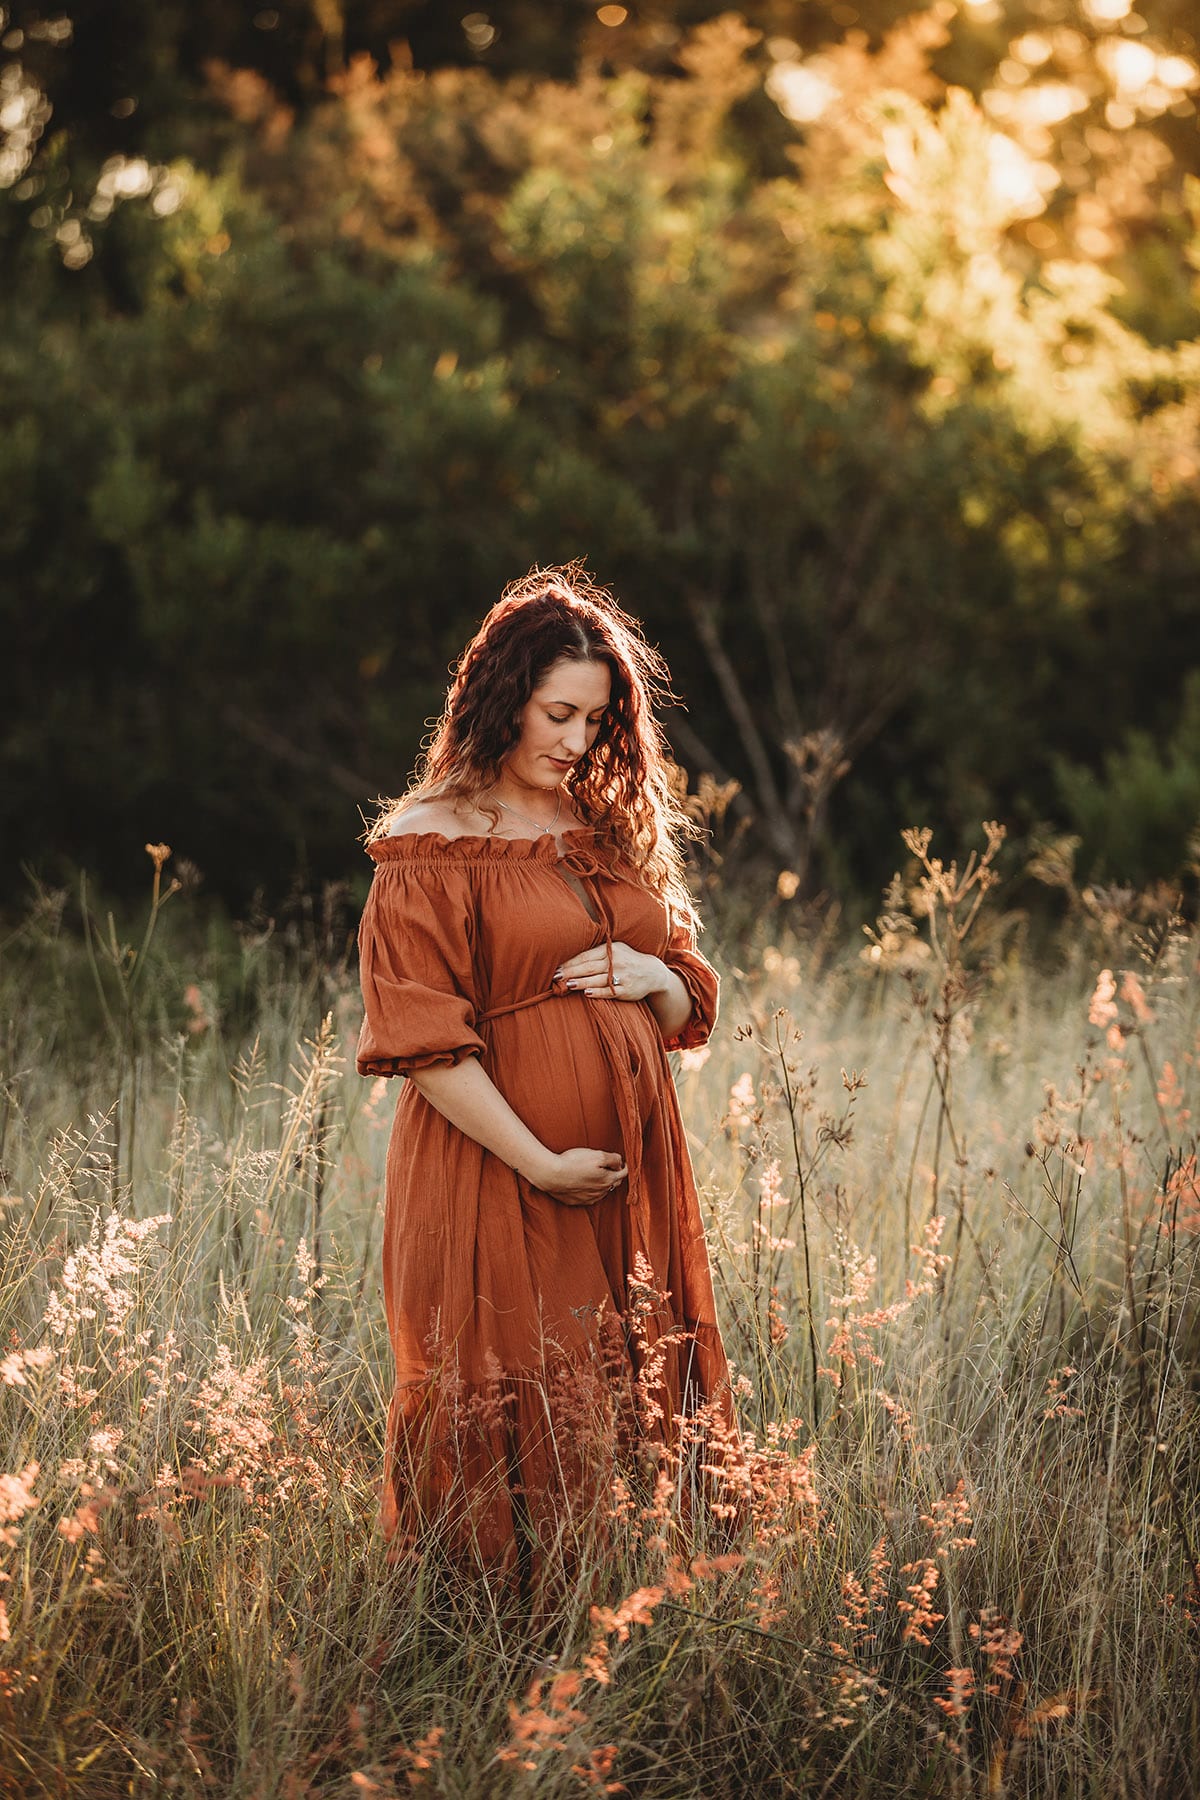 Maternity Photography - a pregnant woman stands in a grassy field at sunset